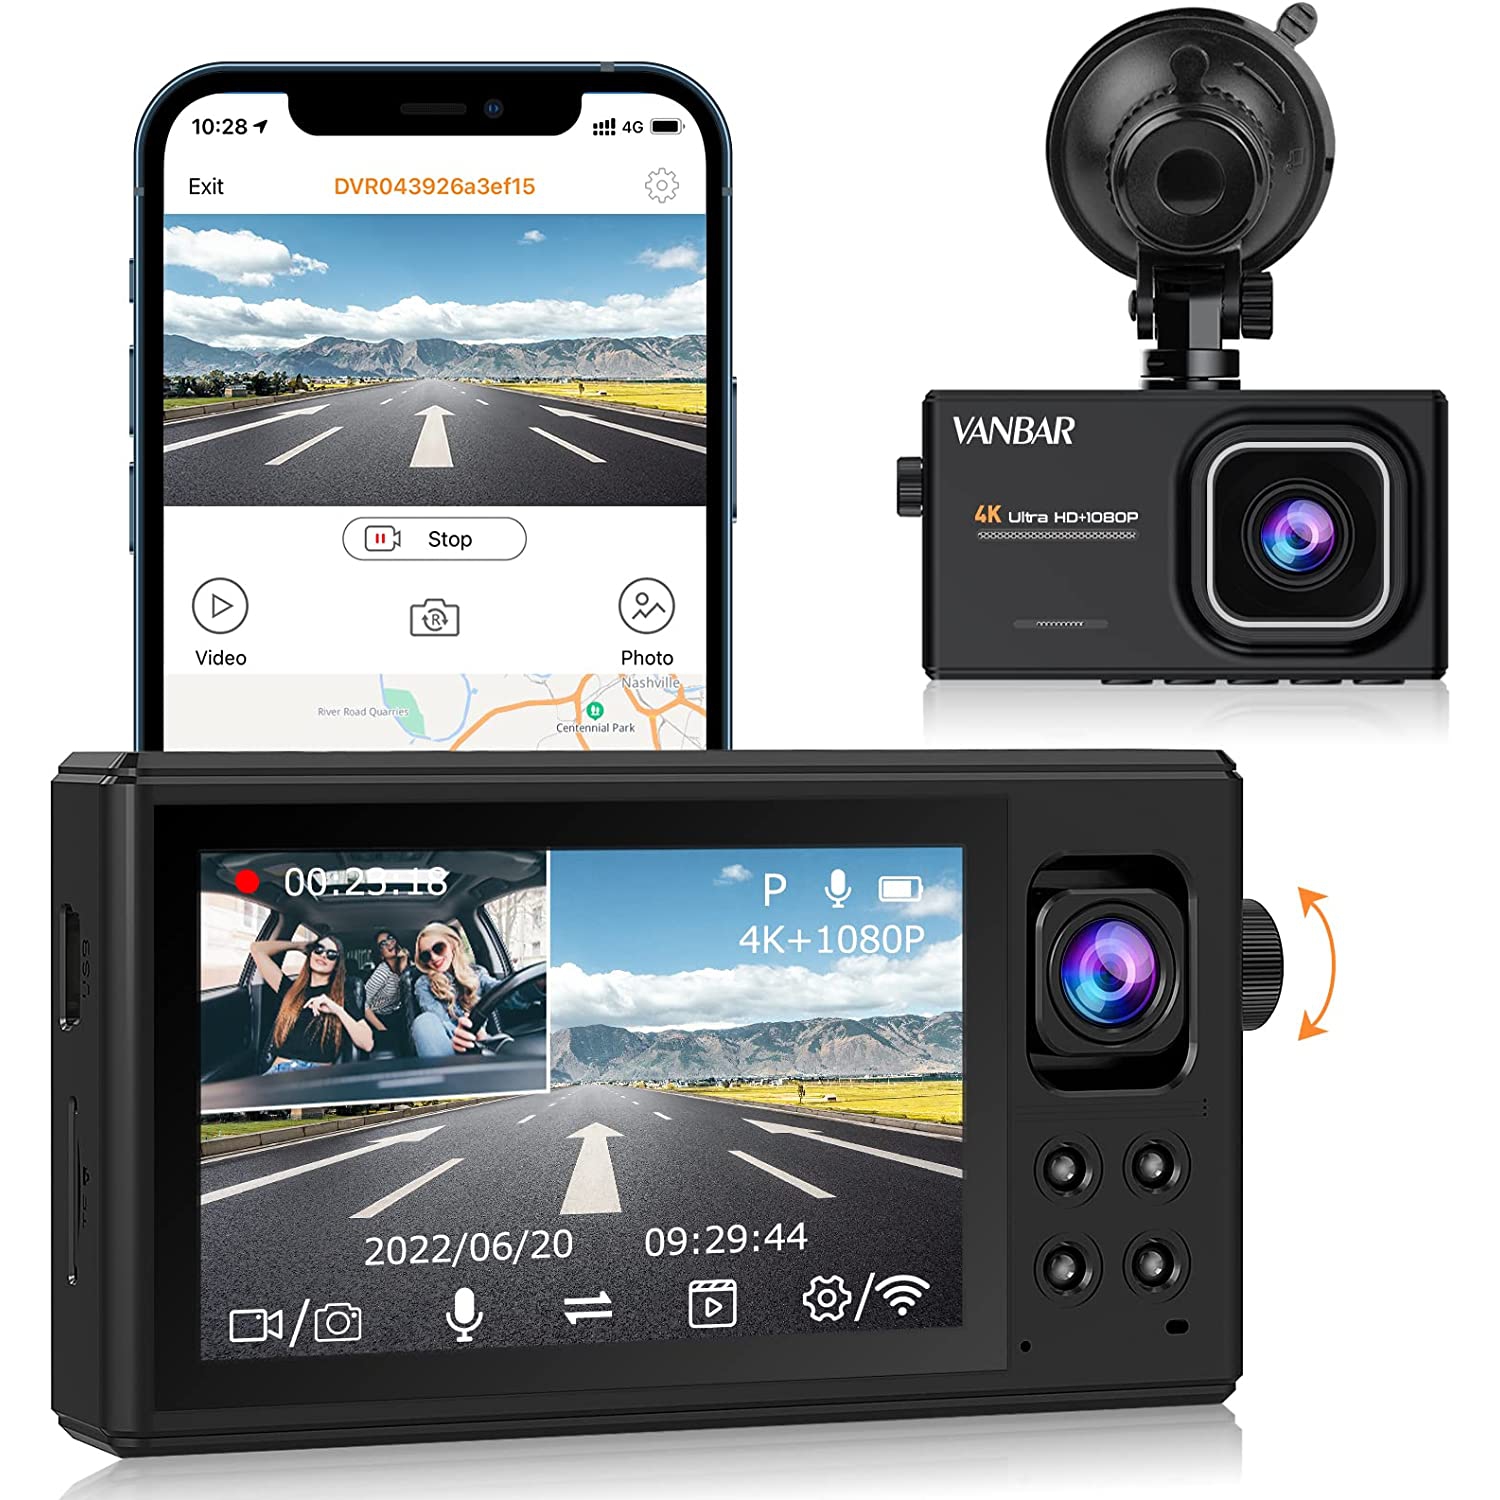 4K Dual Dash Cam with Built-in WiFi GPS, Front 4K/2K Rear 1080P Dual Car Recorder with Sony Sensor, 170° Wide Angle, WDR, Motion Detection, Super Night Vision Car Camera 256GB